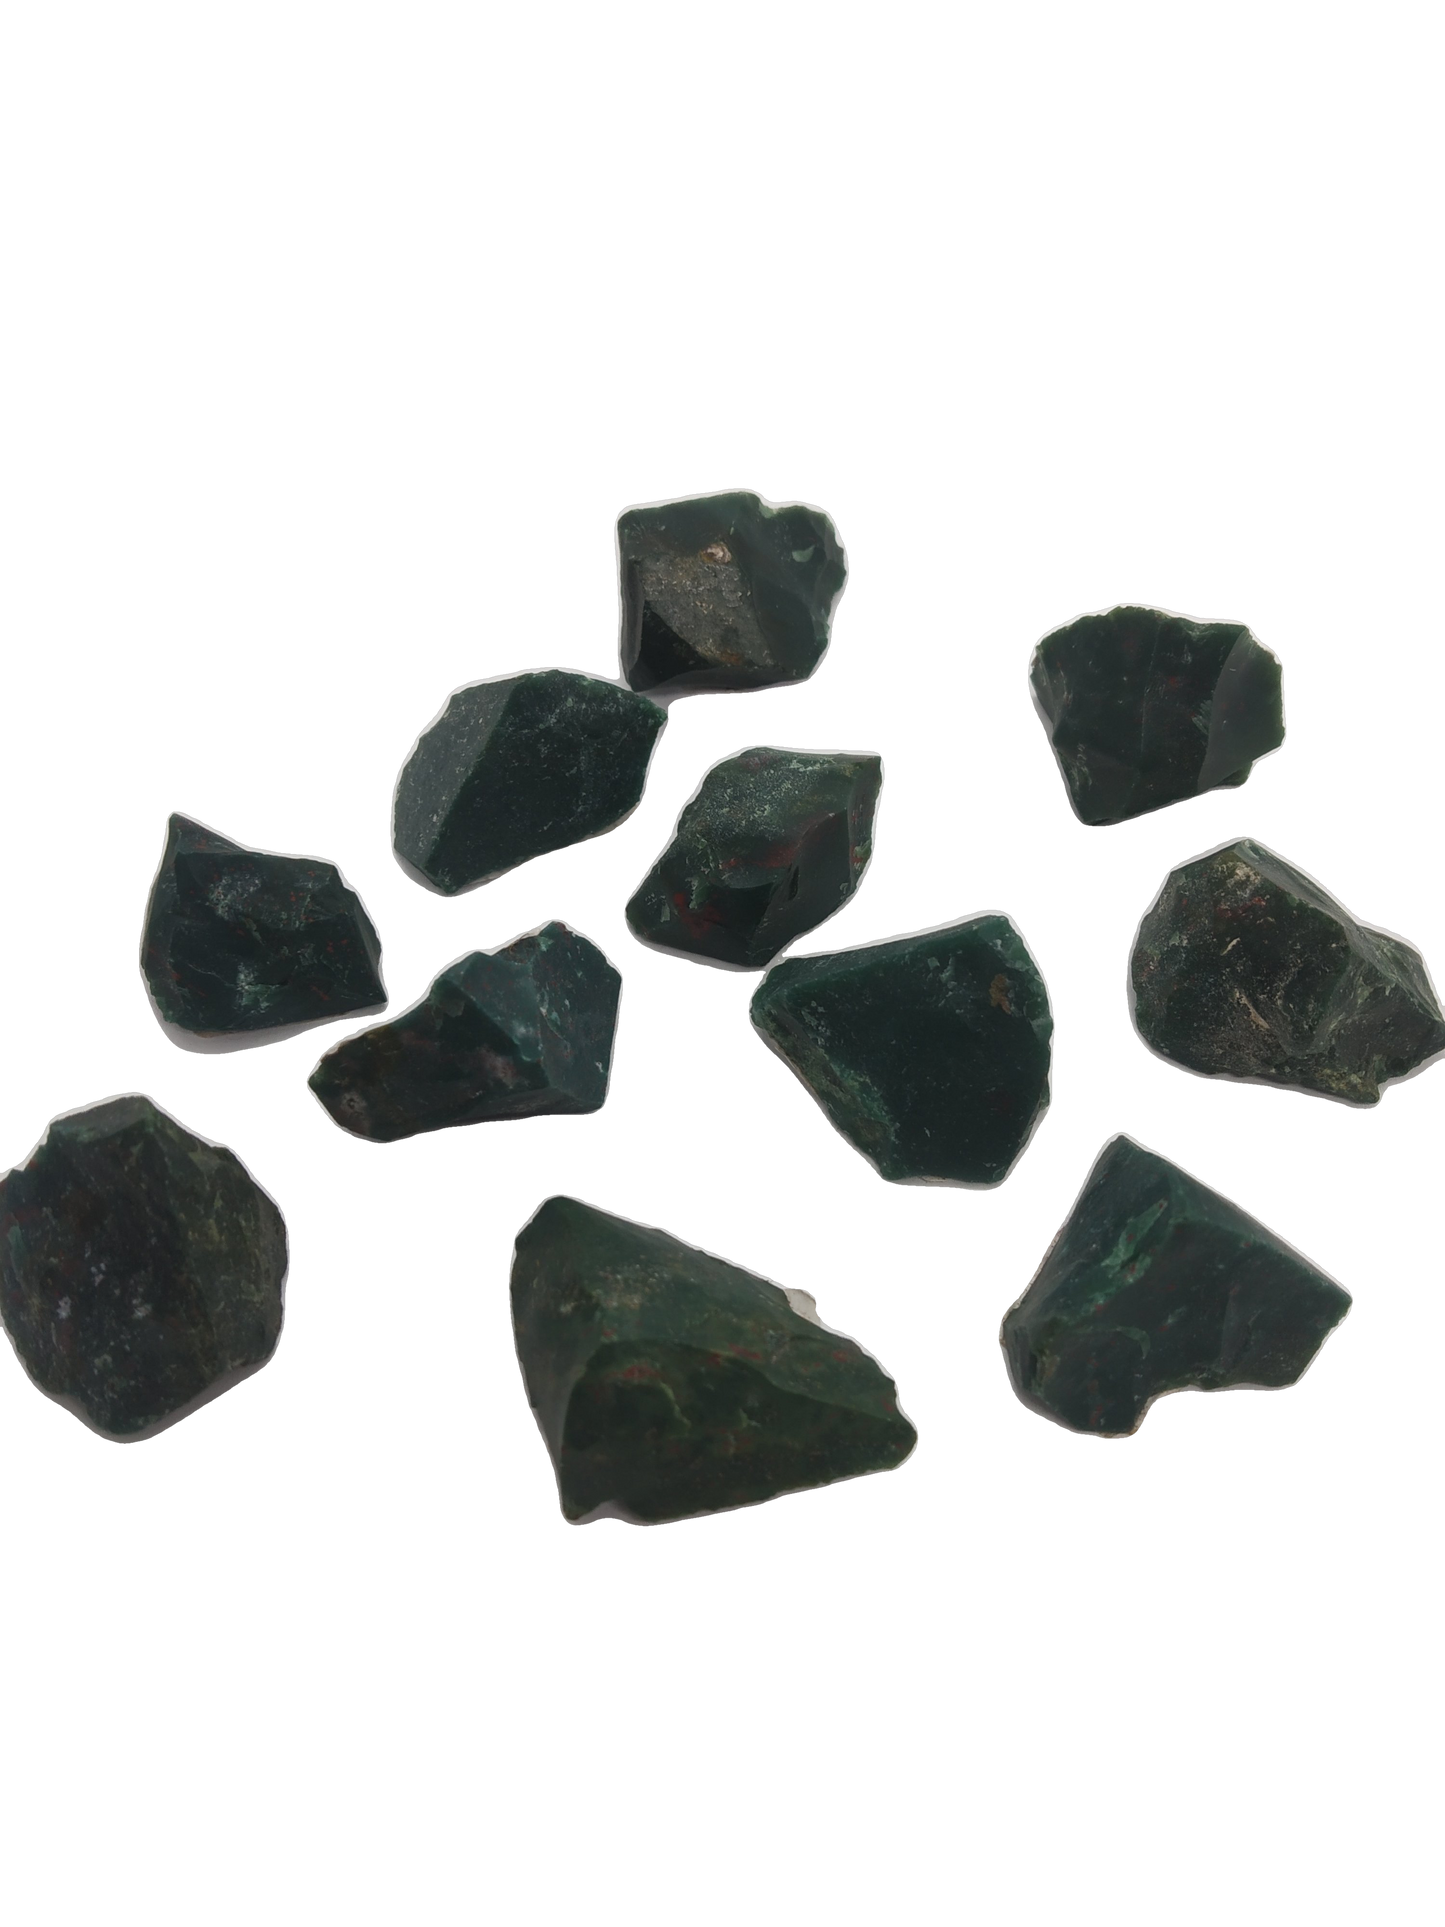 Bloodstone Rough pieces - Crystal Geological